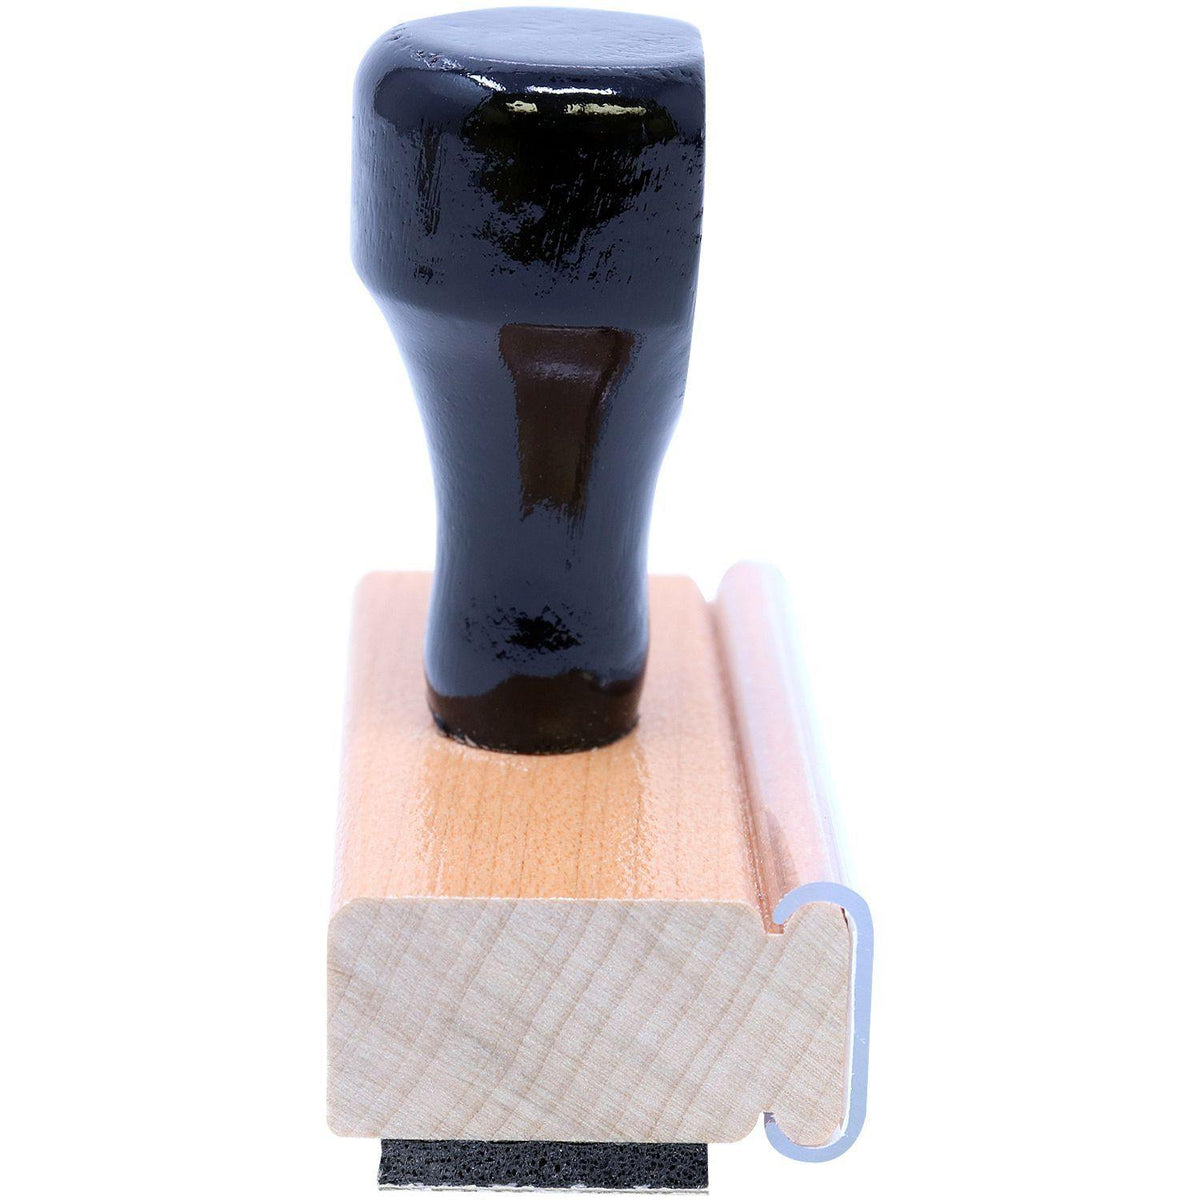 Of Rubber Stamp - Engineer Seal Stamps - Brand_Acorn, Impression Size_Small, Stamp Type_Regular Stamp, Type of Use_Postal &amp; Mailing, Type of Use_Shipping &amp; Receiving